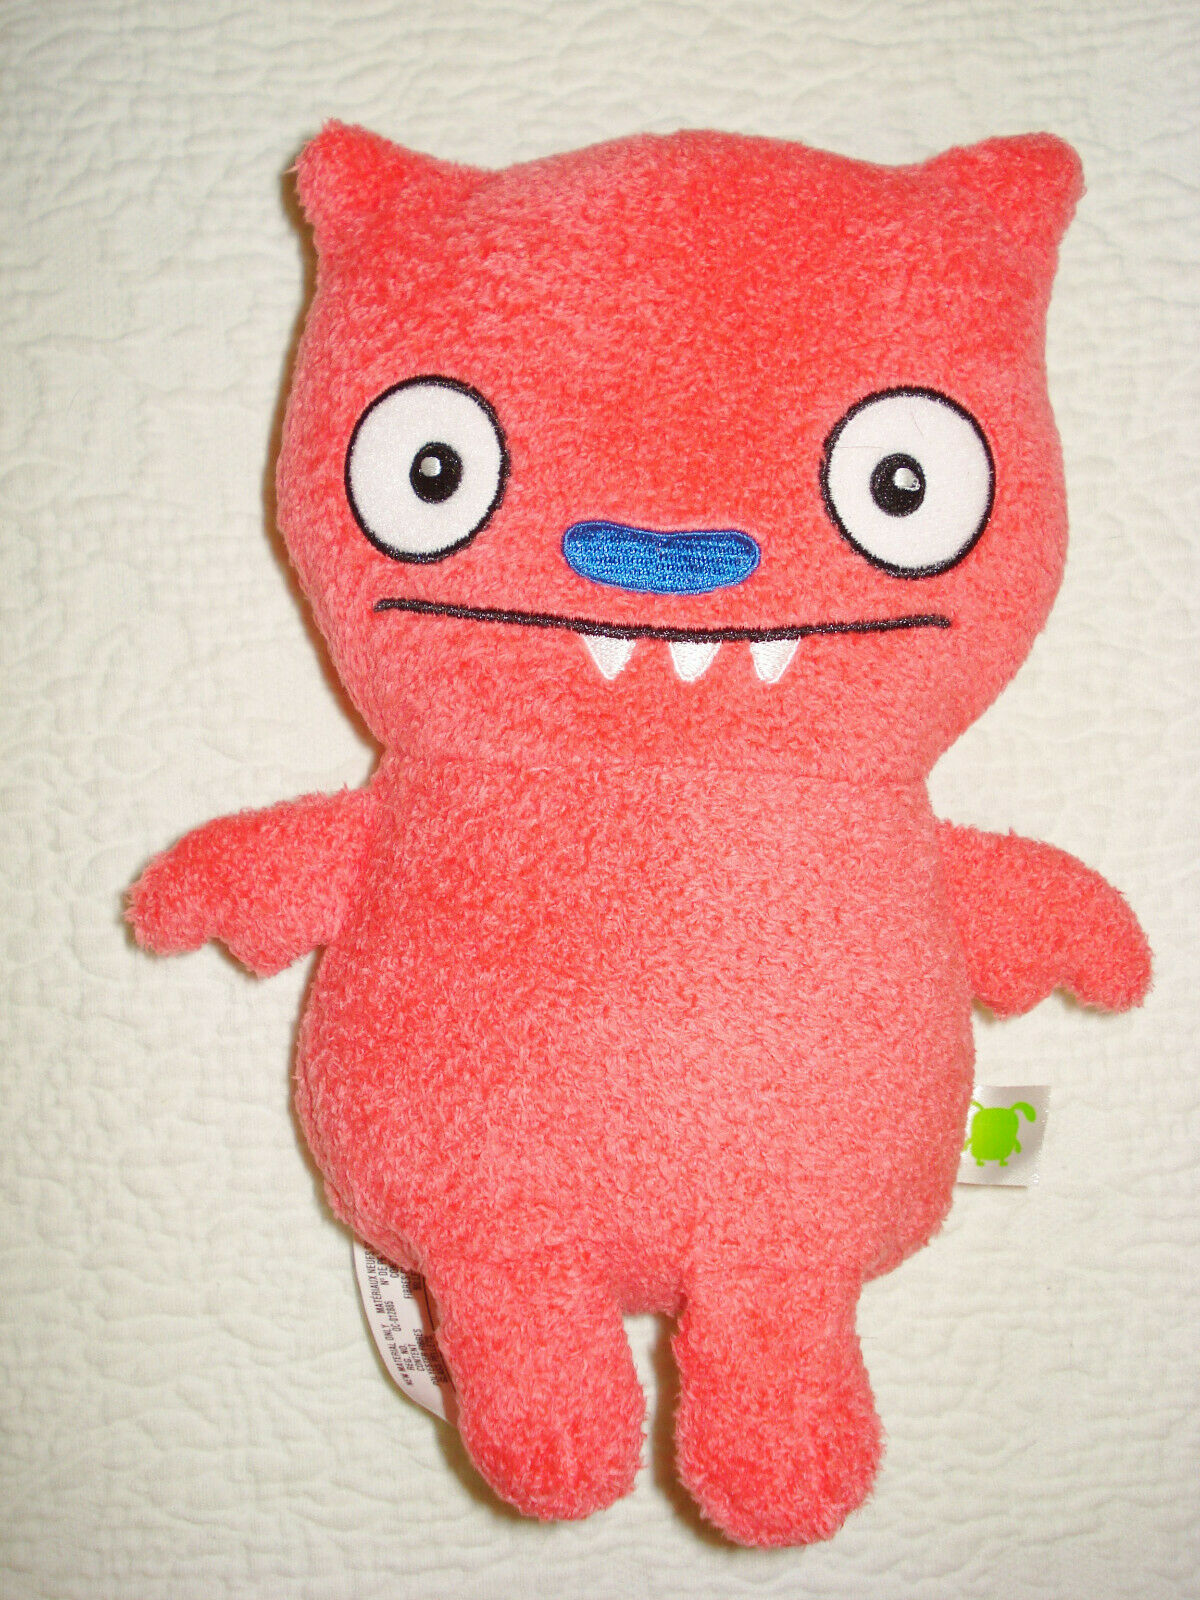 Plush Pink 9" Ugly Doll With Bean Bottom By Hasbro